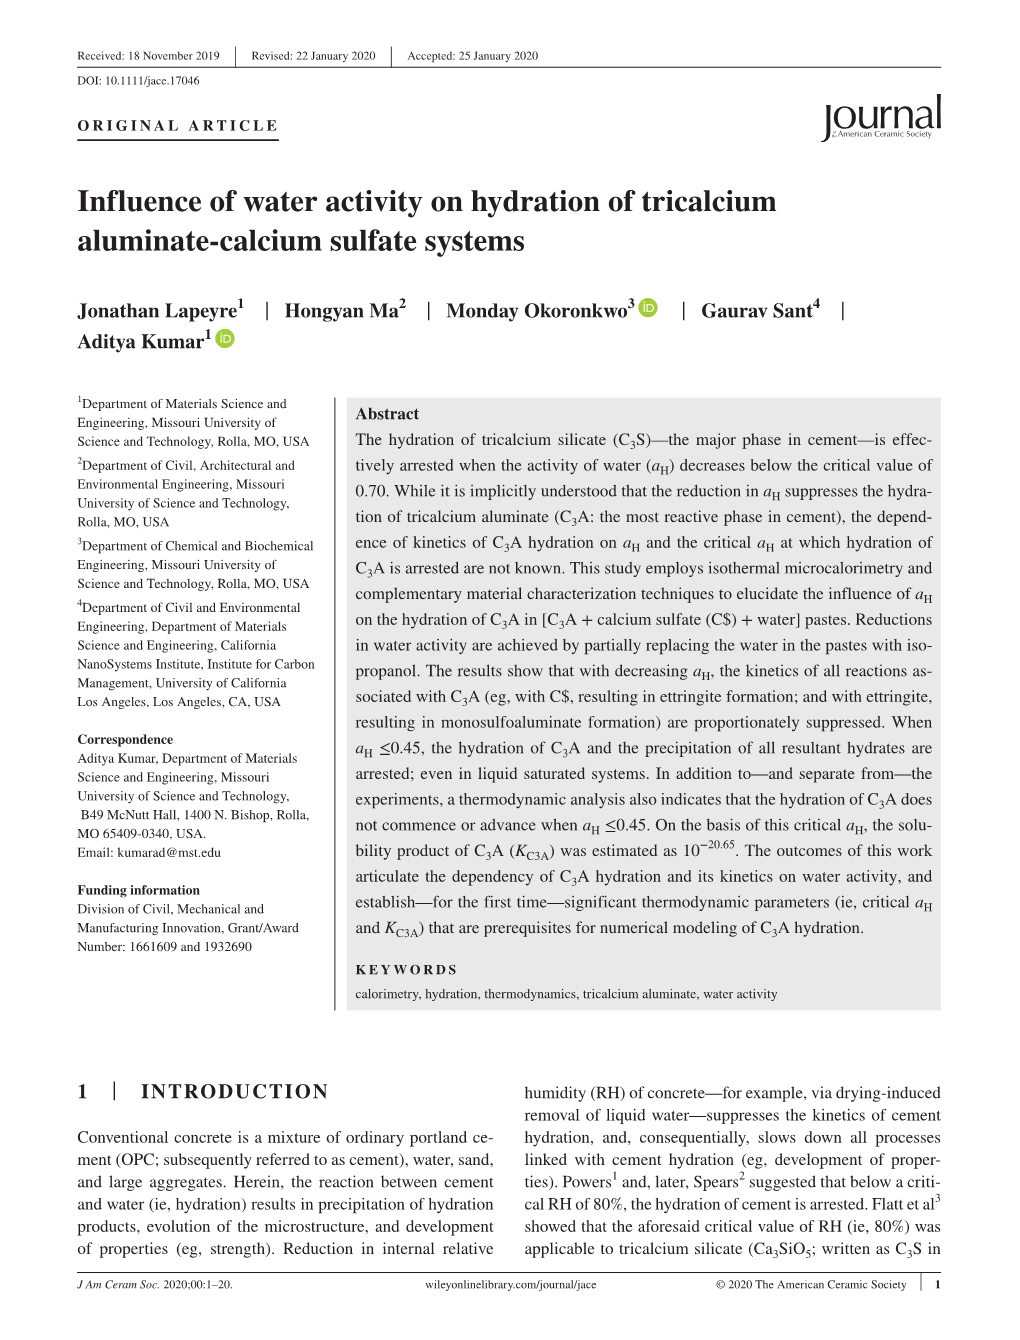 Influence of Water Activity on Hydration of Tricalcium Aluminate‐Calcium